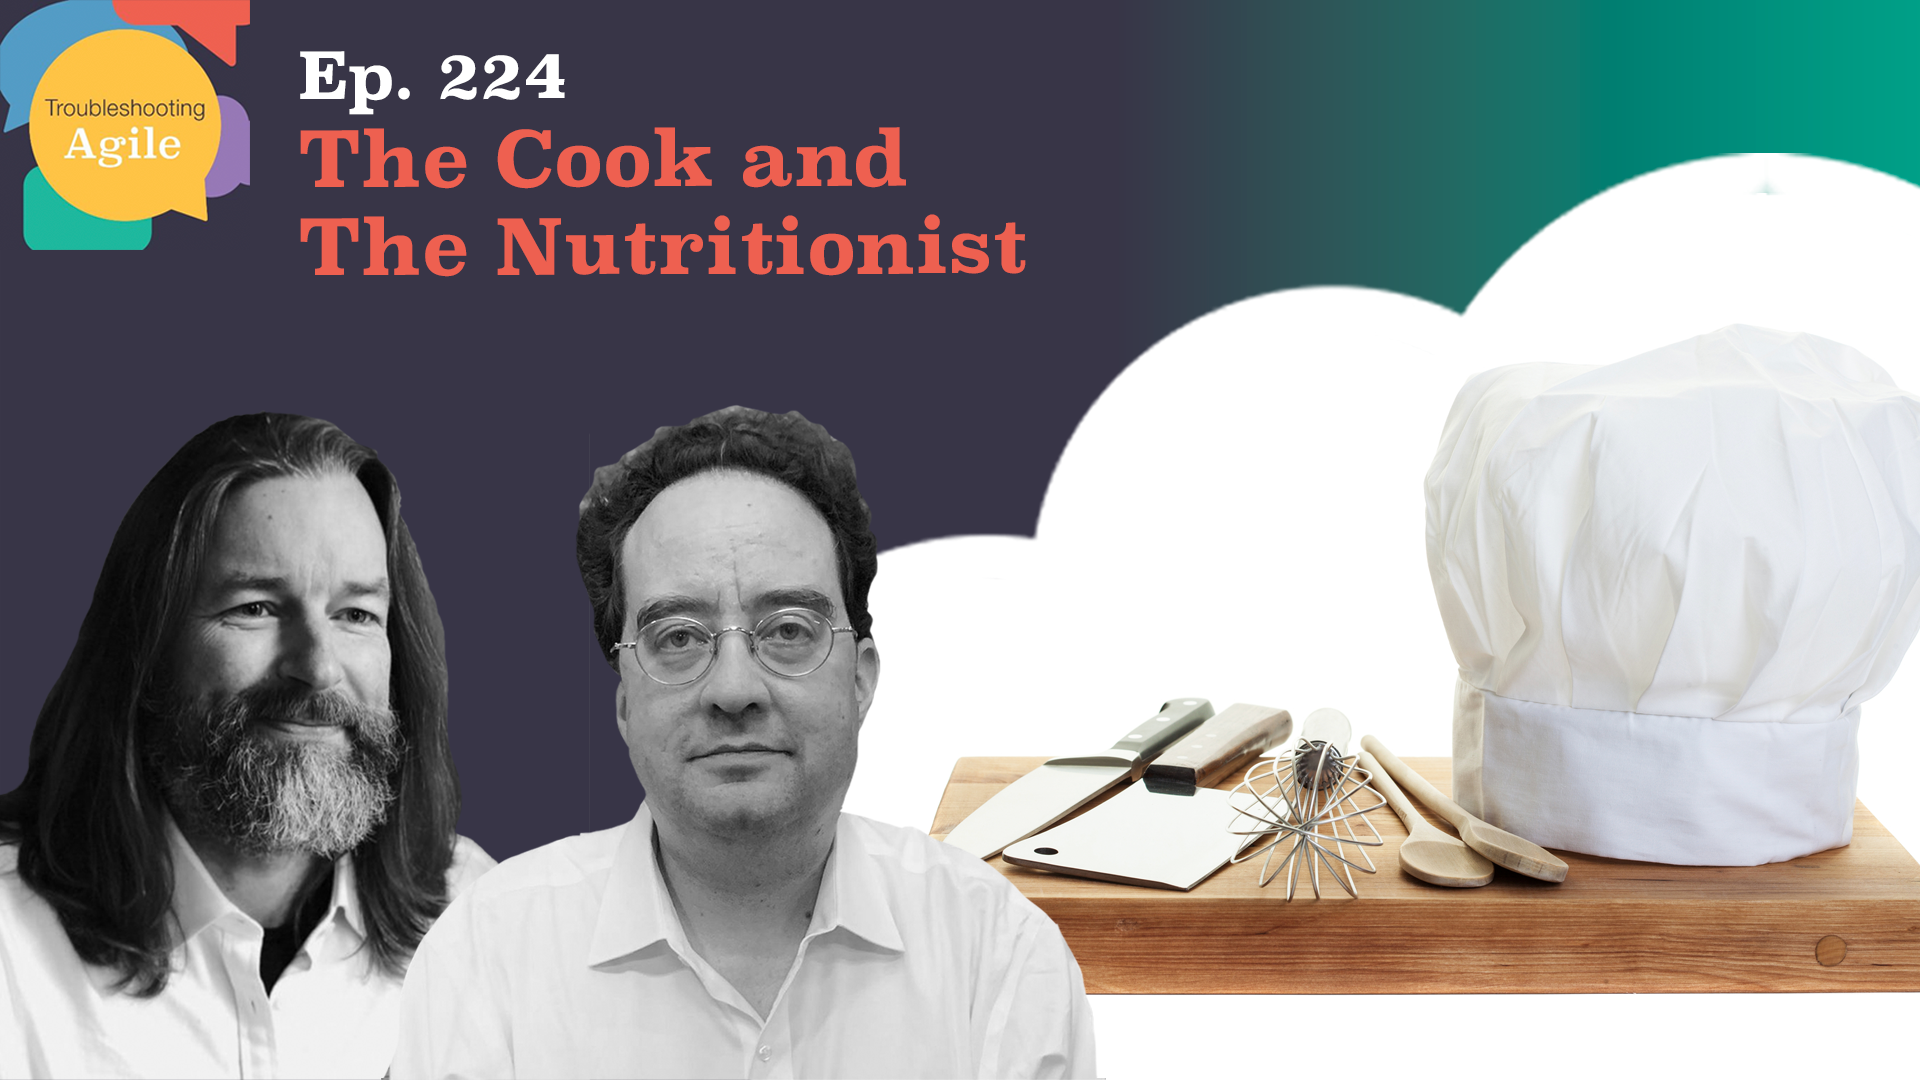 The Cook and The Nutritionist